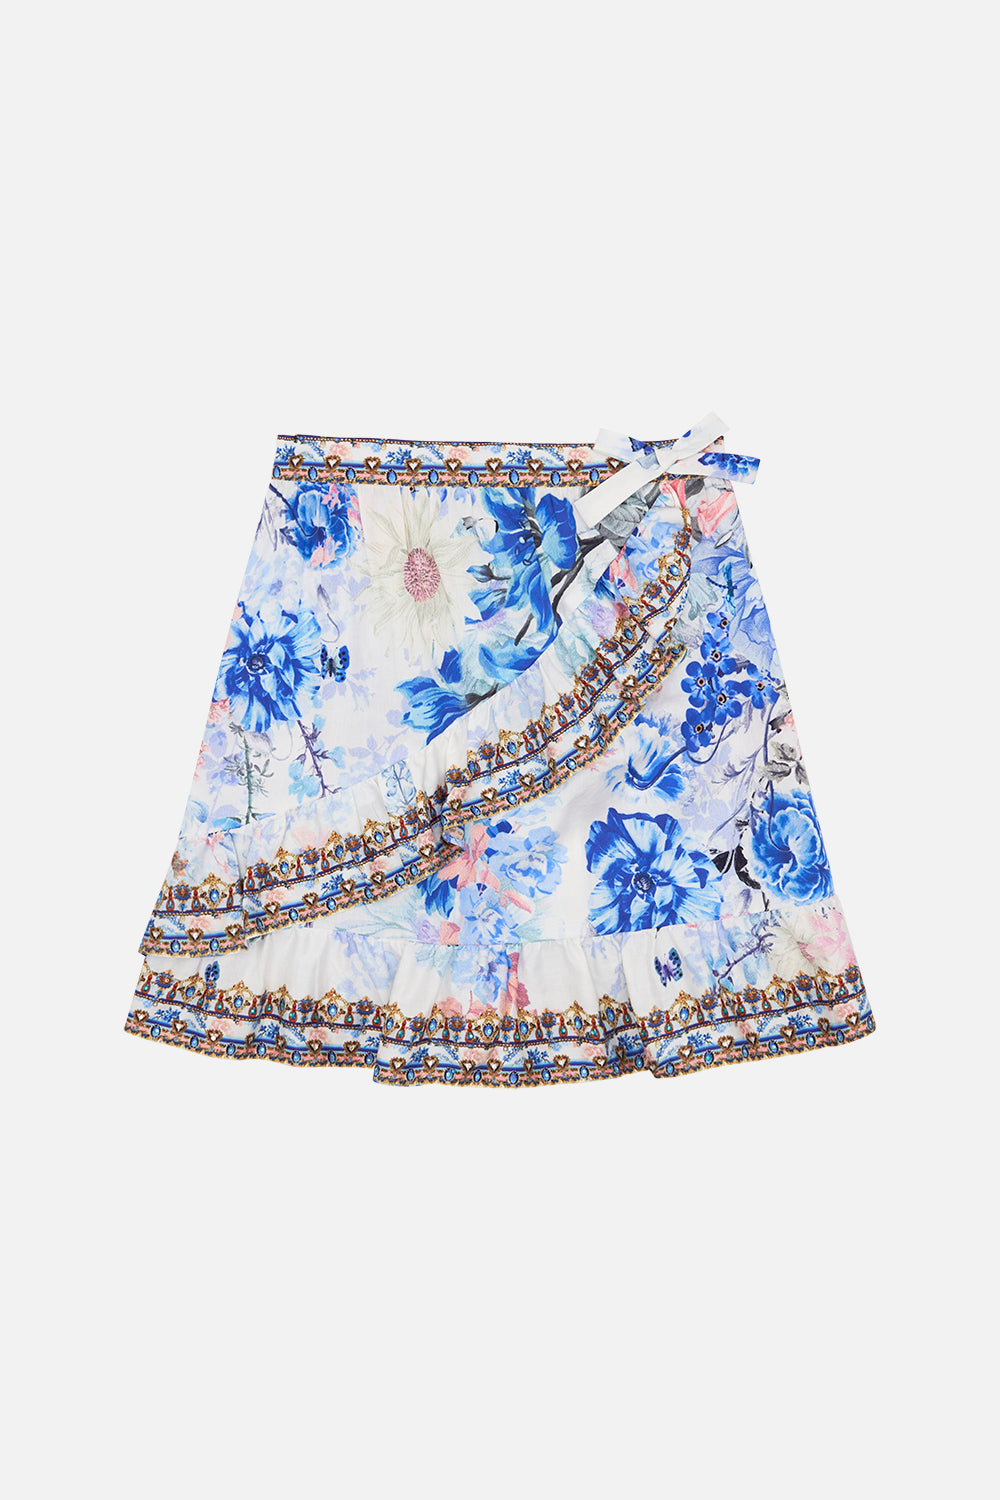 Product view of MILLA BY CAMILLA kids floral wrap skirt in Tuscan Moondance print